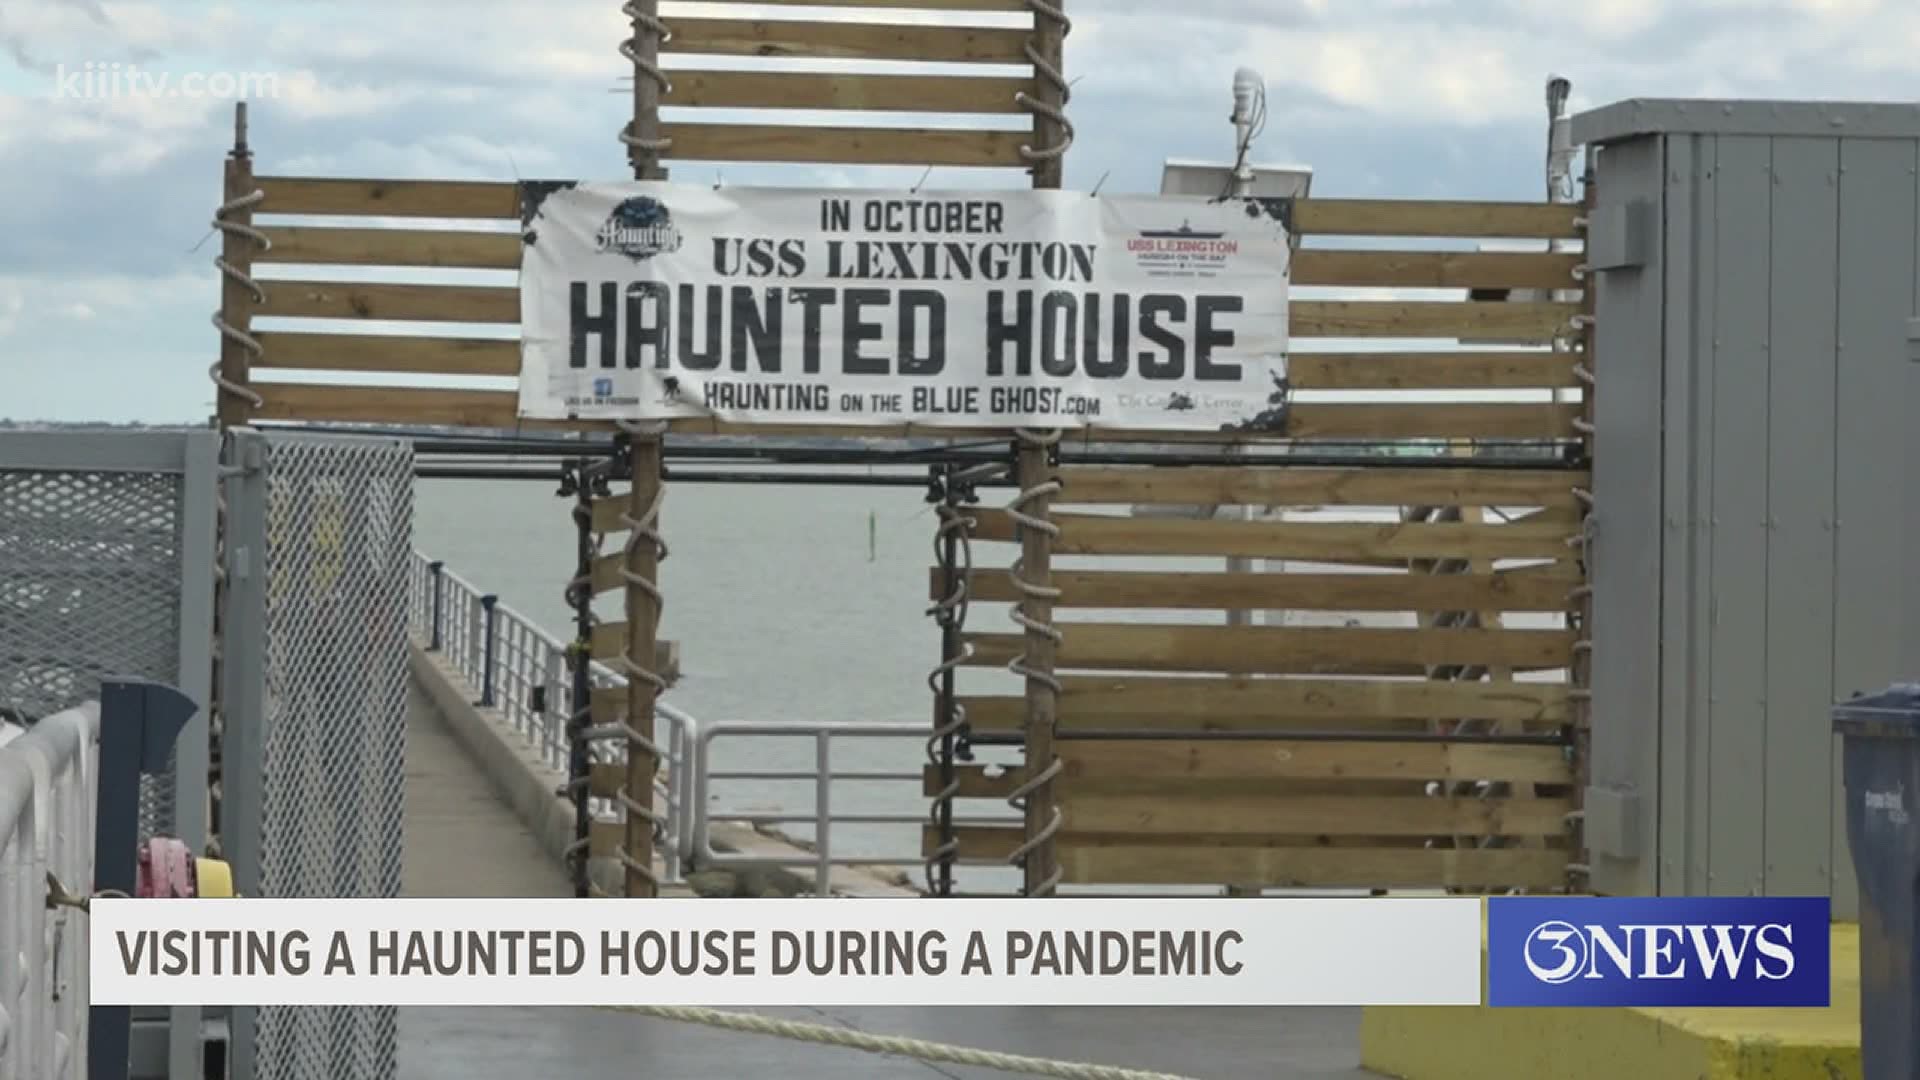 This Halloween will be a bit different, one local haunted is house is taking extra precautions to ensure visitors safety.